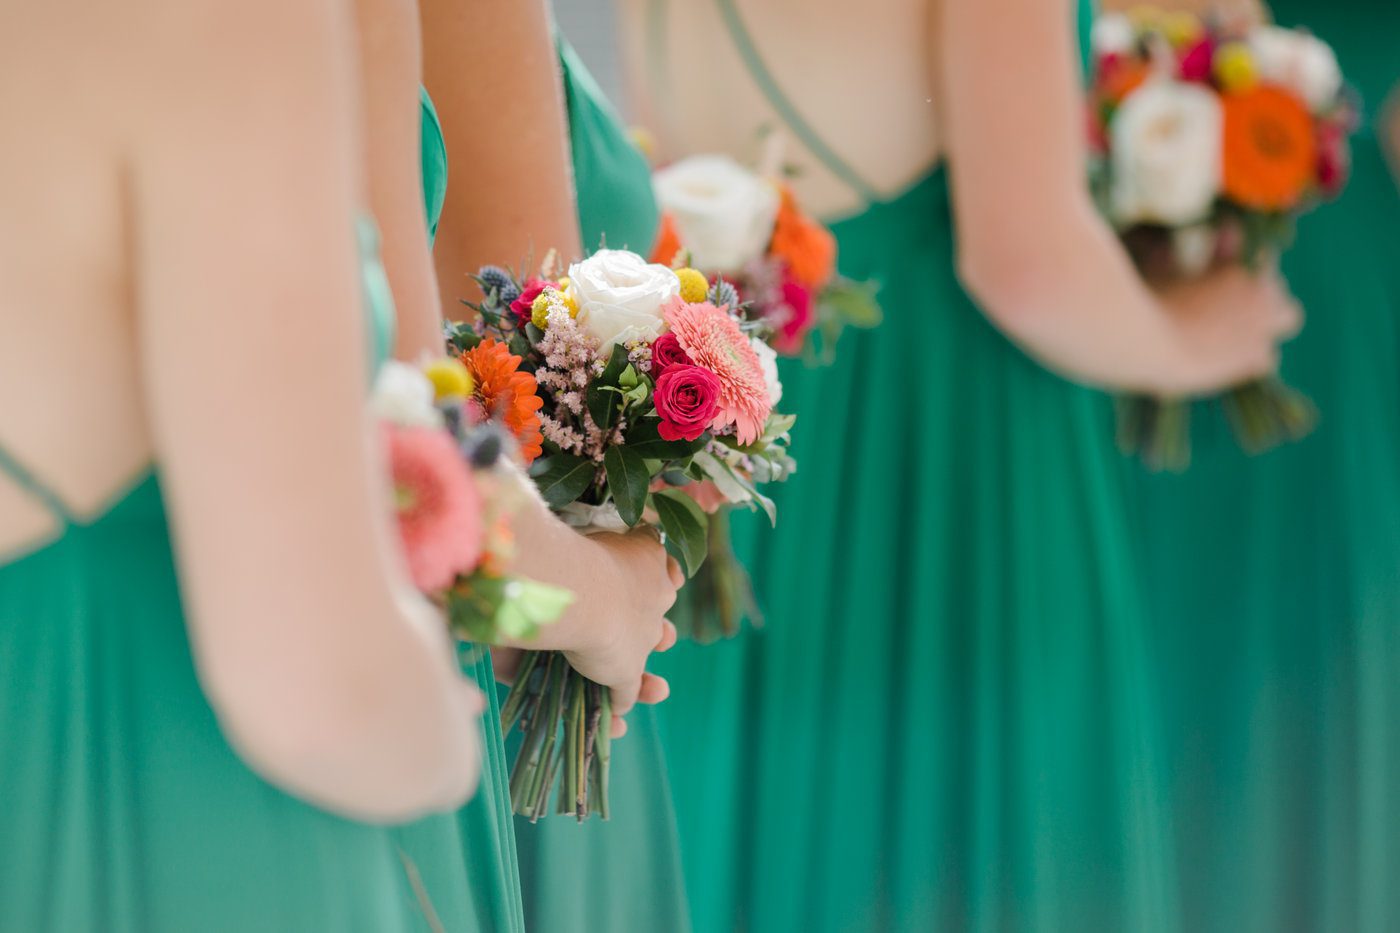 Pink and green wedding colors